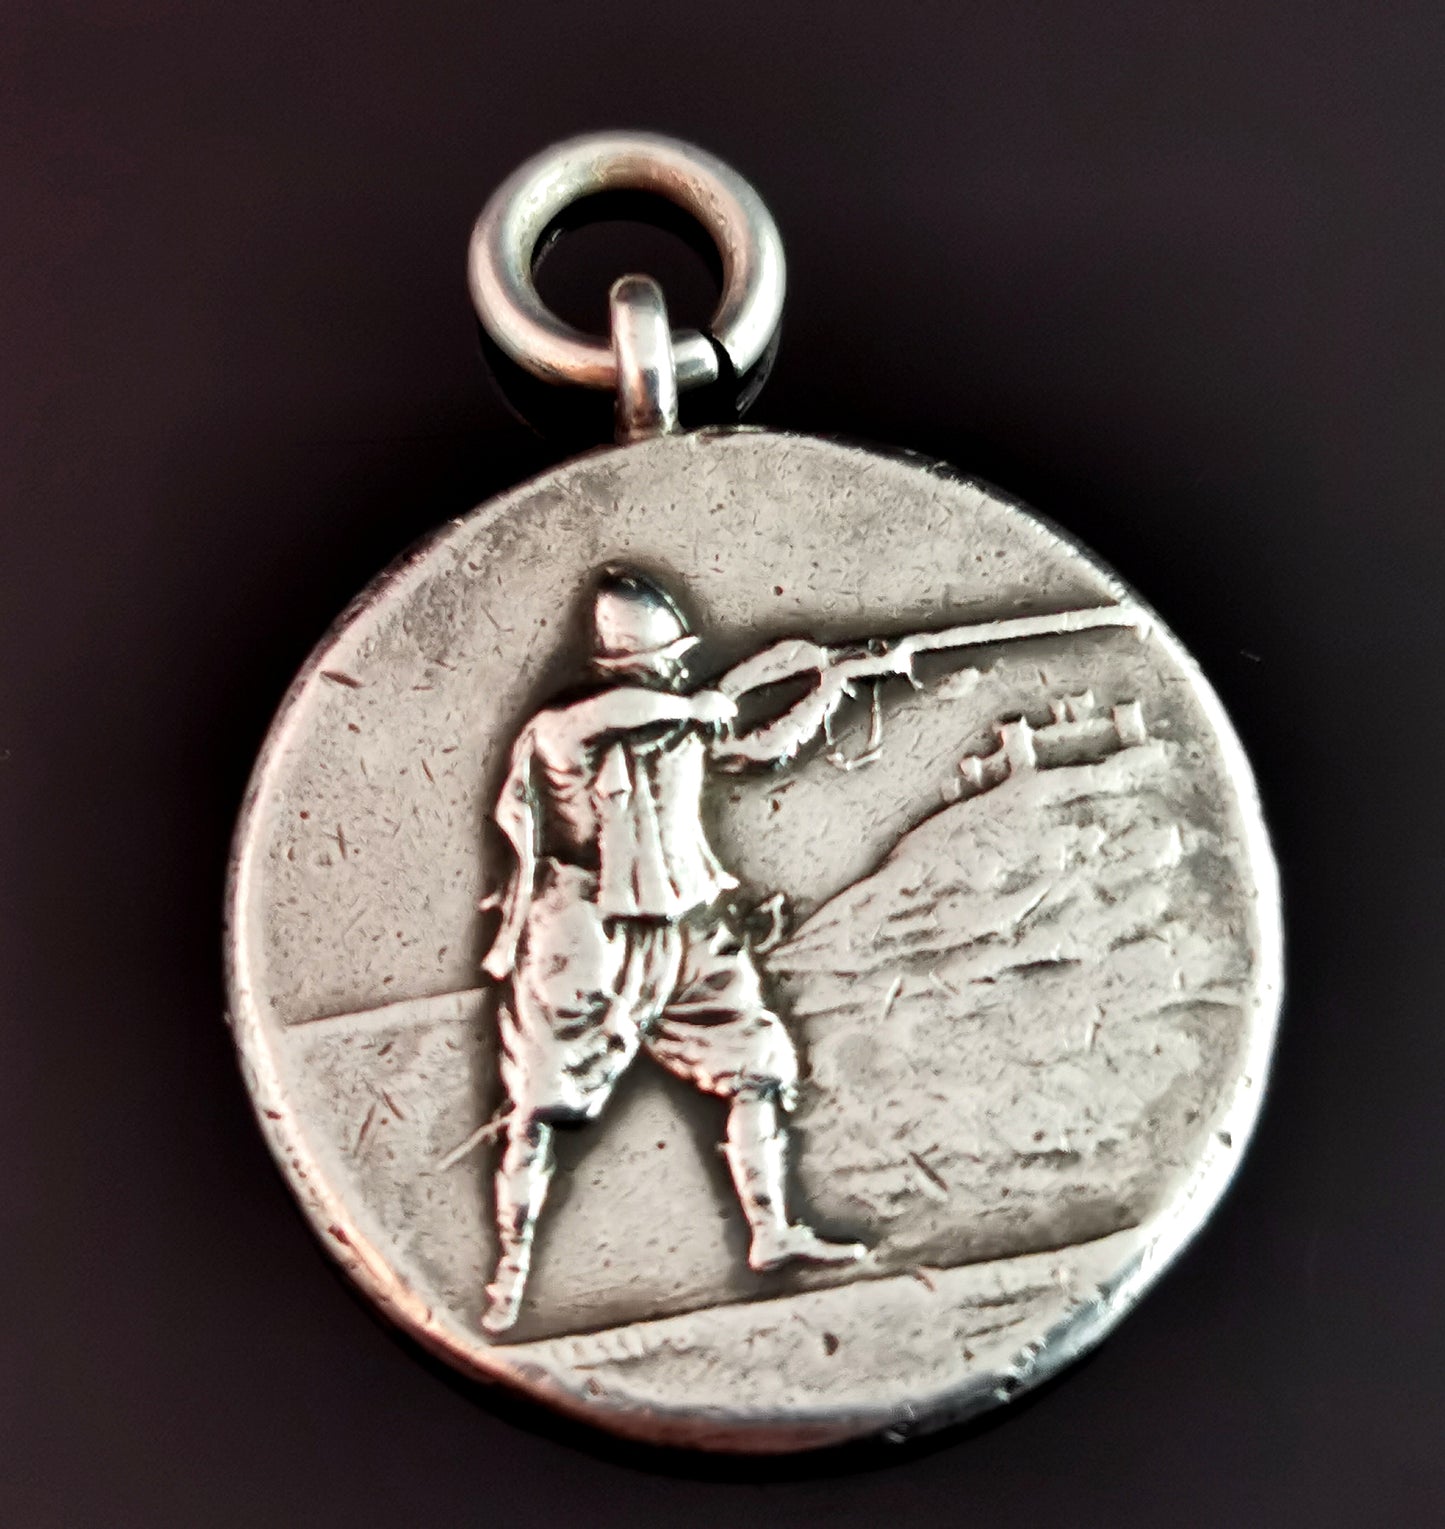 Antique sterling silver fob pendant, watch fob, Shooting